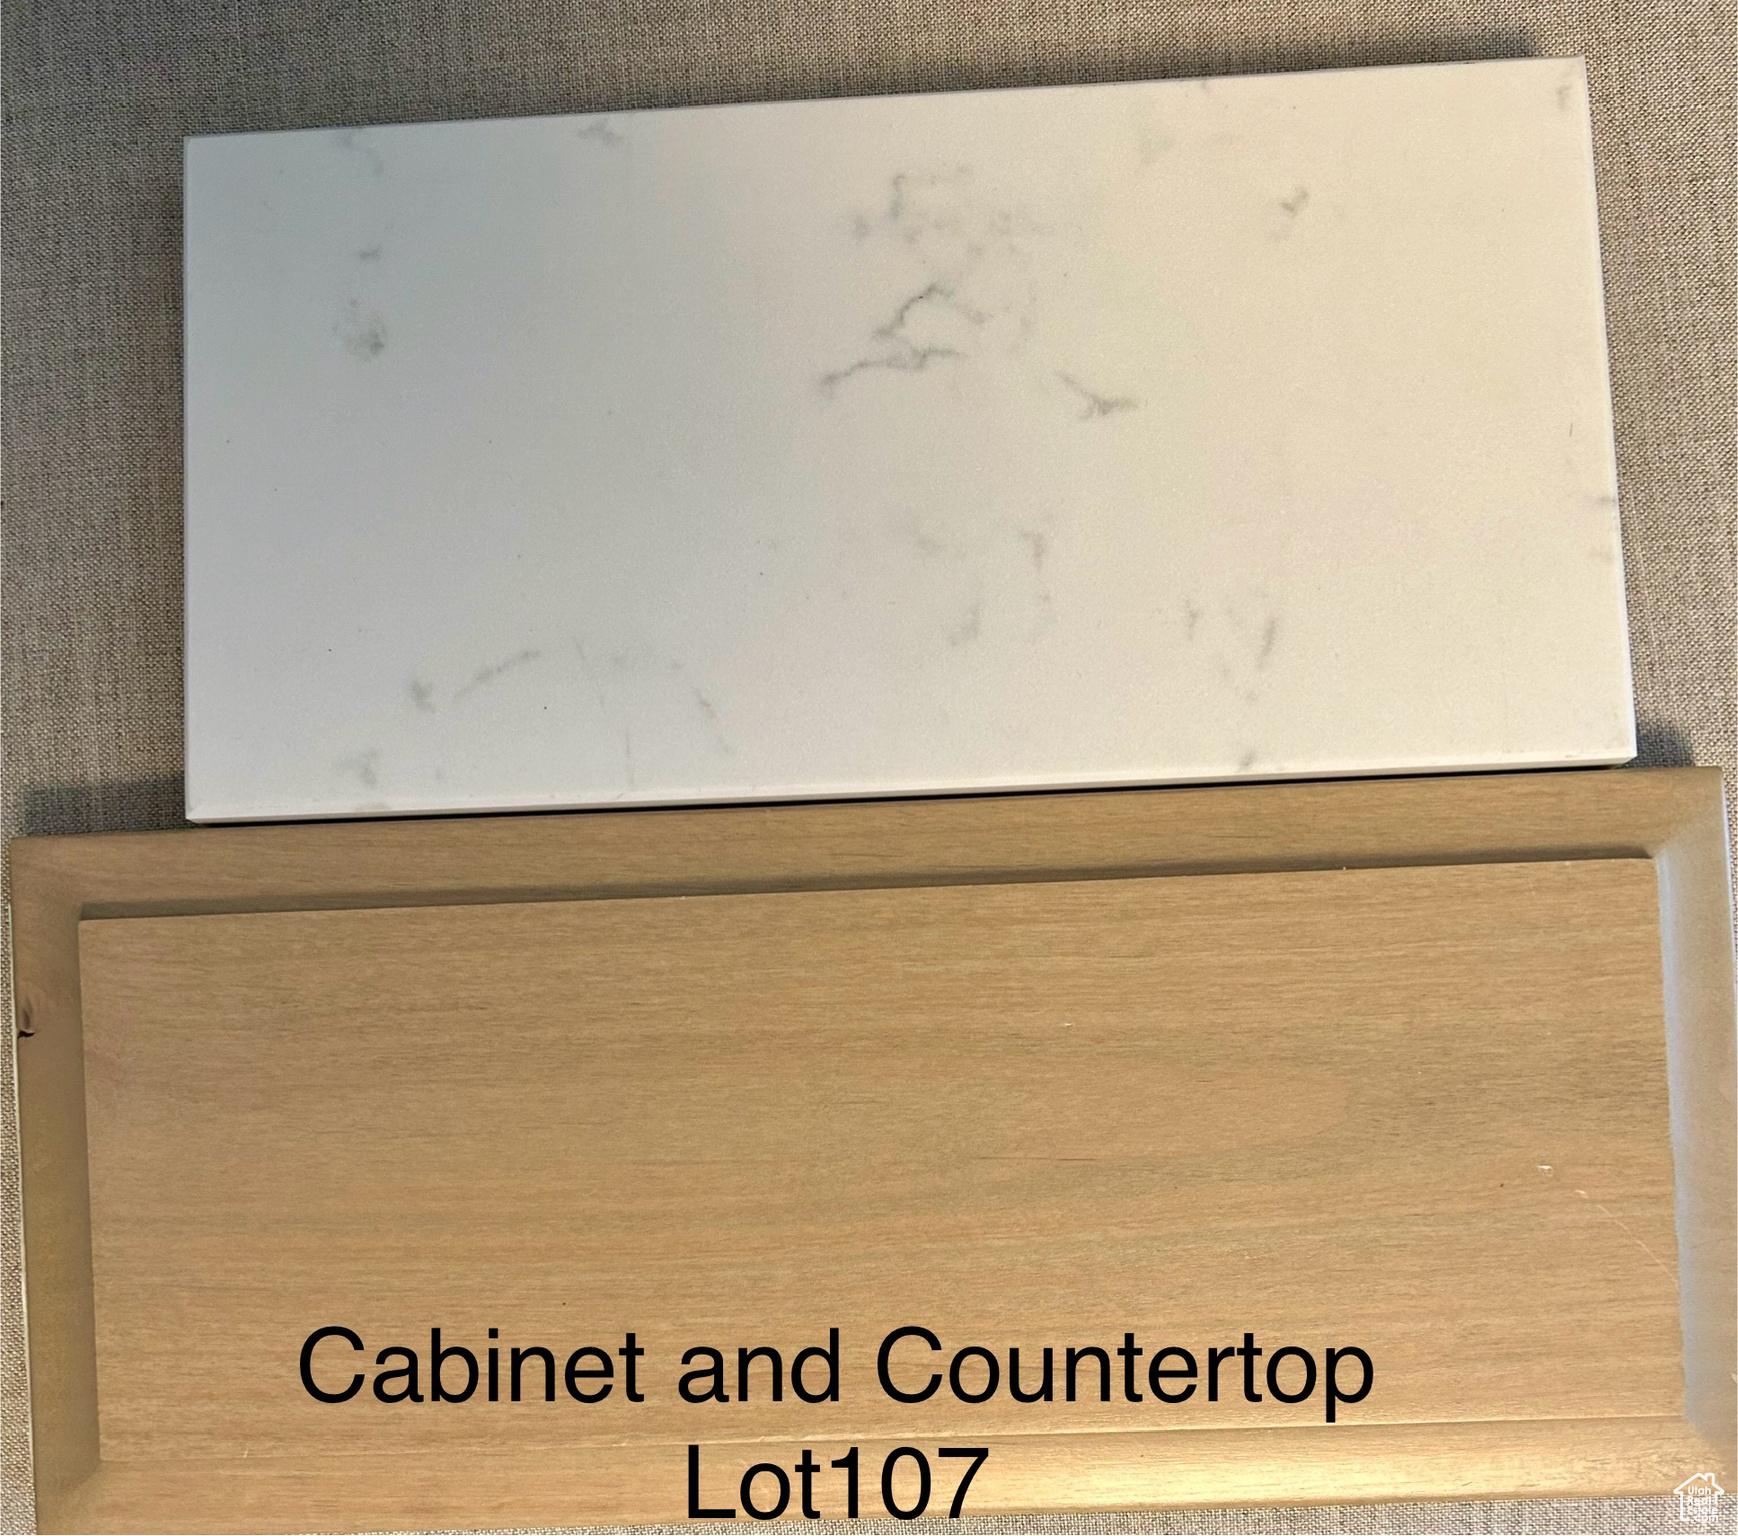 Cabinets and countertops